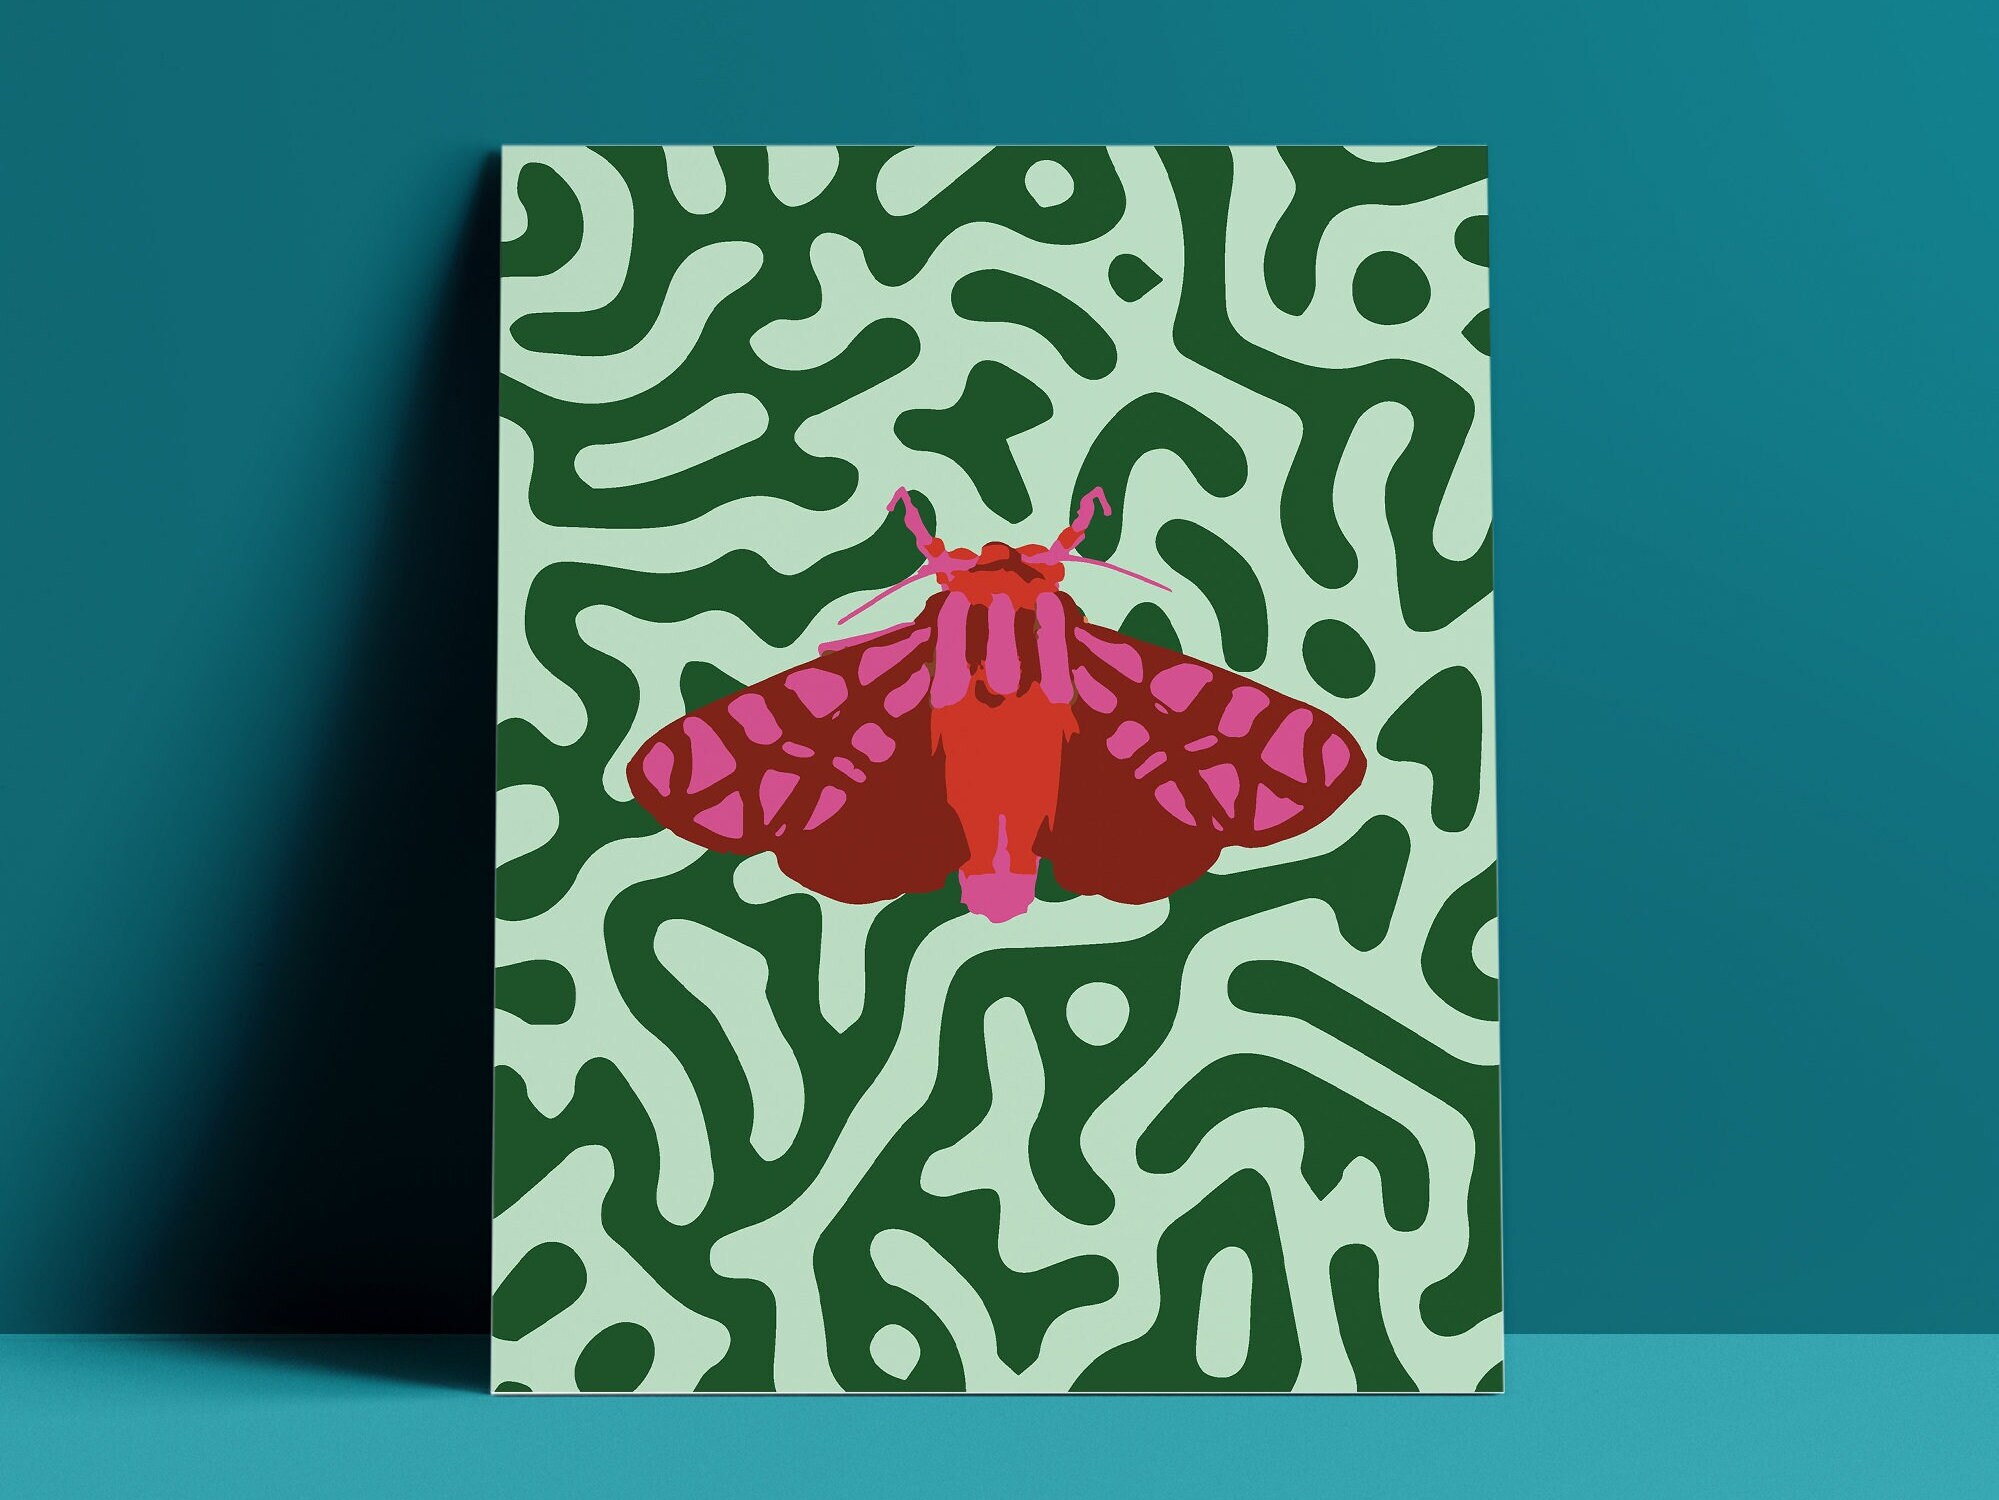 Butterfly Louis Vuitton/ pop art circle Painting by CHEEKY BUNNY